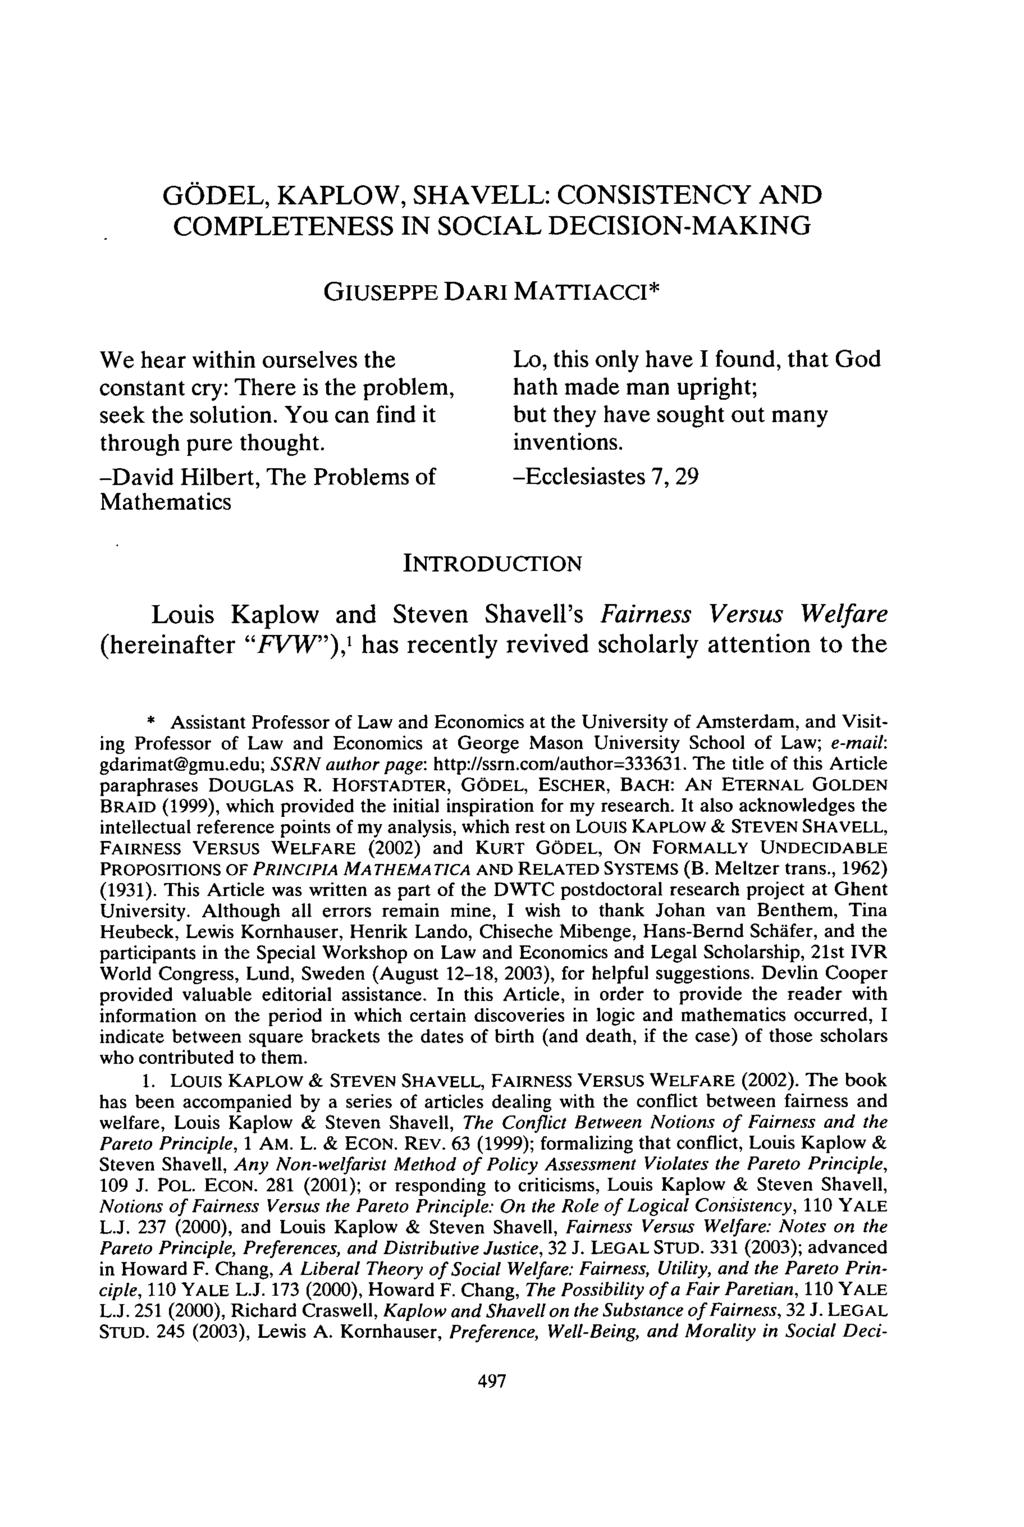 GODEL, KAPLOW, SHAVELL: CONSISTENCY AND COMPLETENESS IN SOCIAL DECISION-MAKING GIUSEPPE DARI MATTIACCI* We hear within ourselves the Lo, this only have I found, that God constant cry: There is the